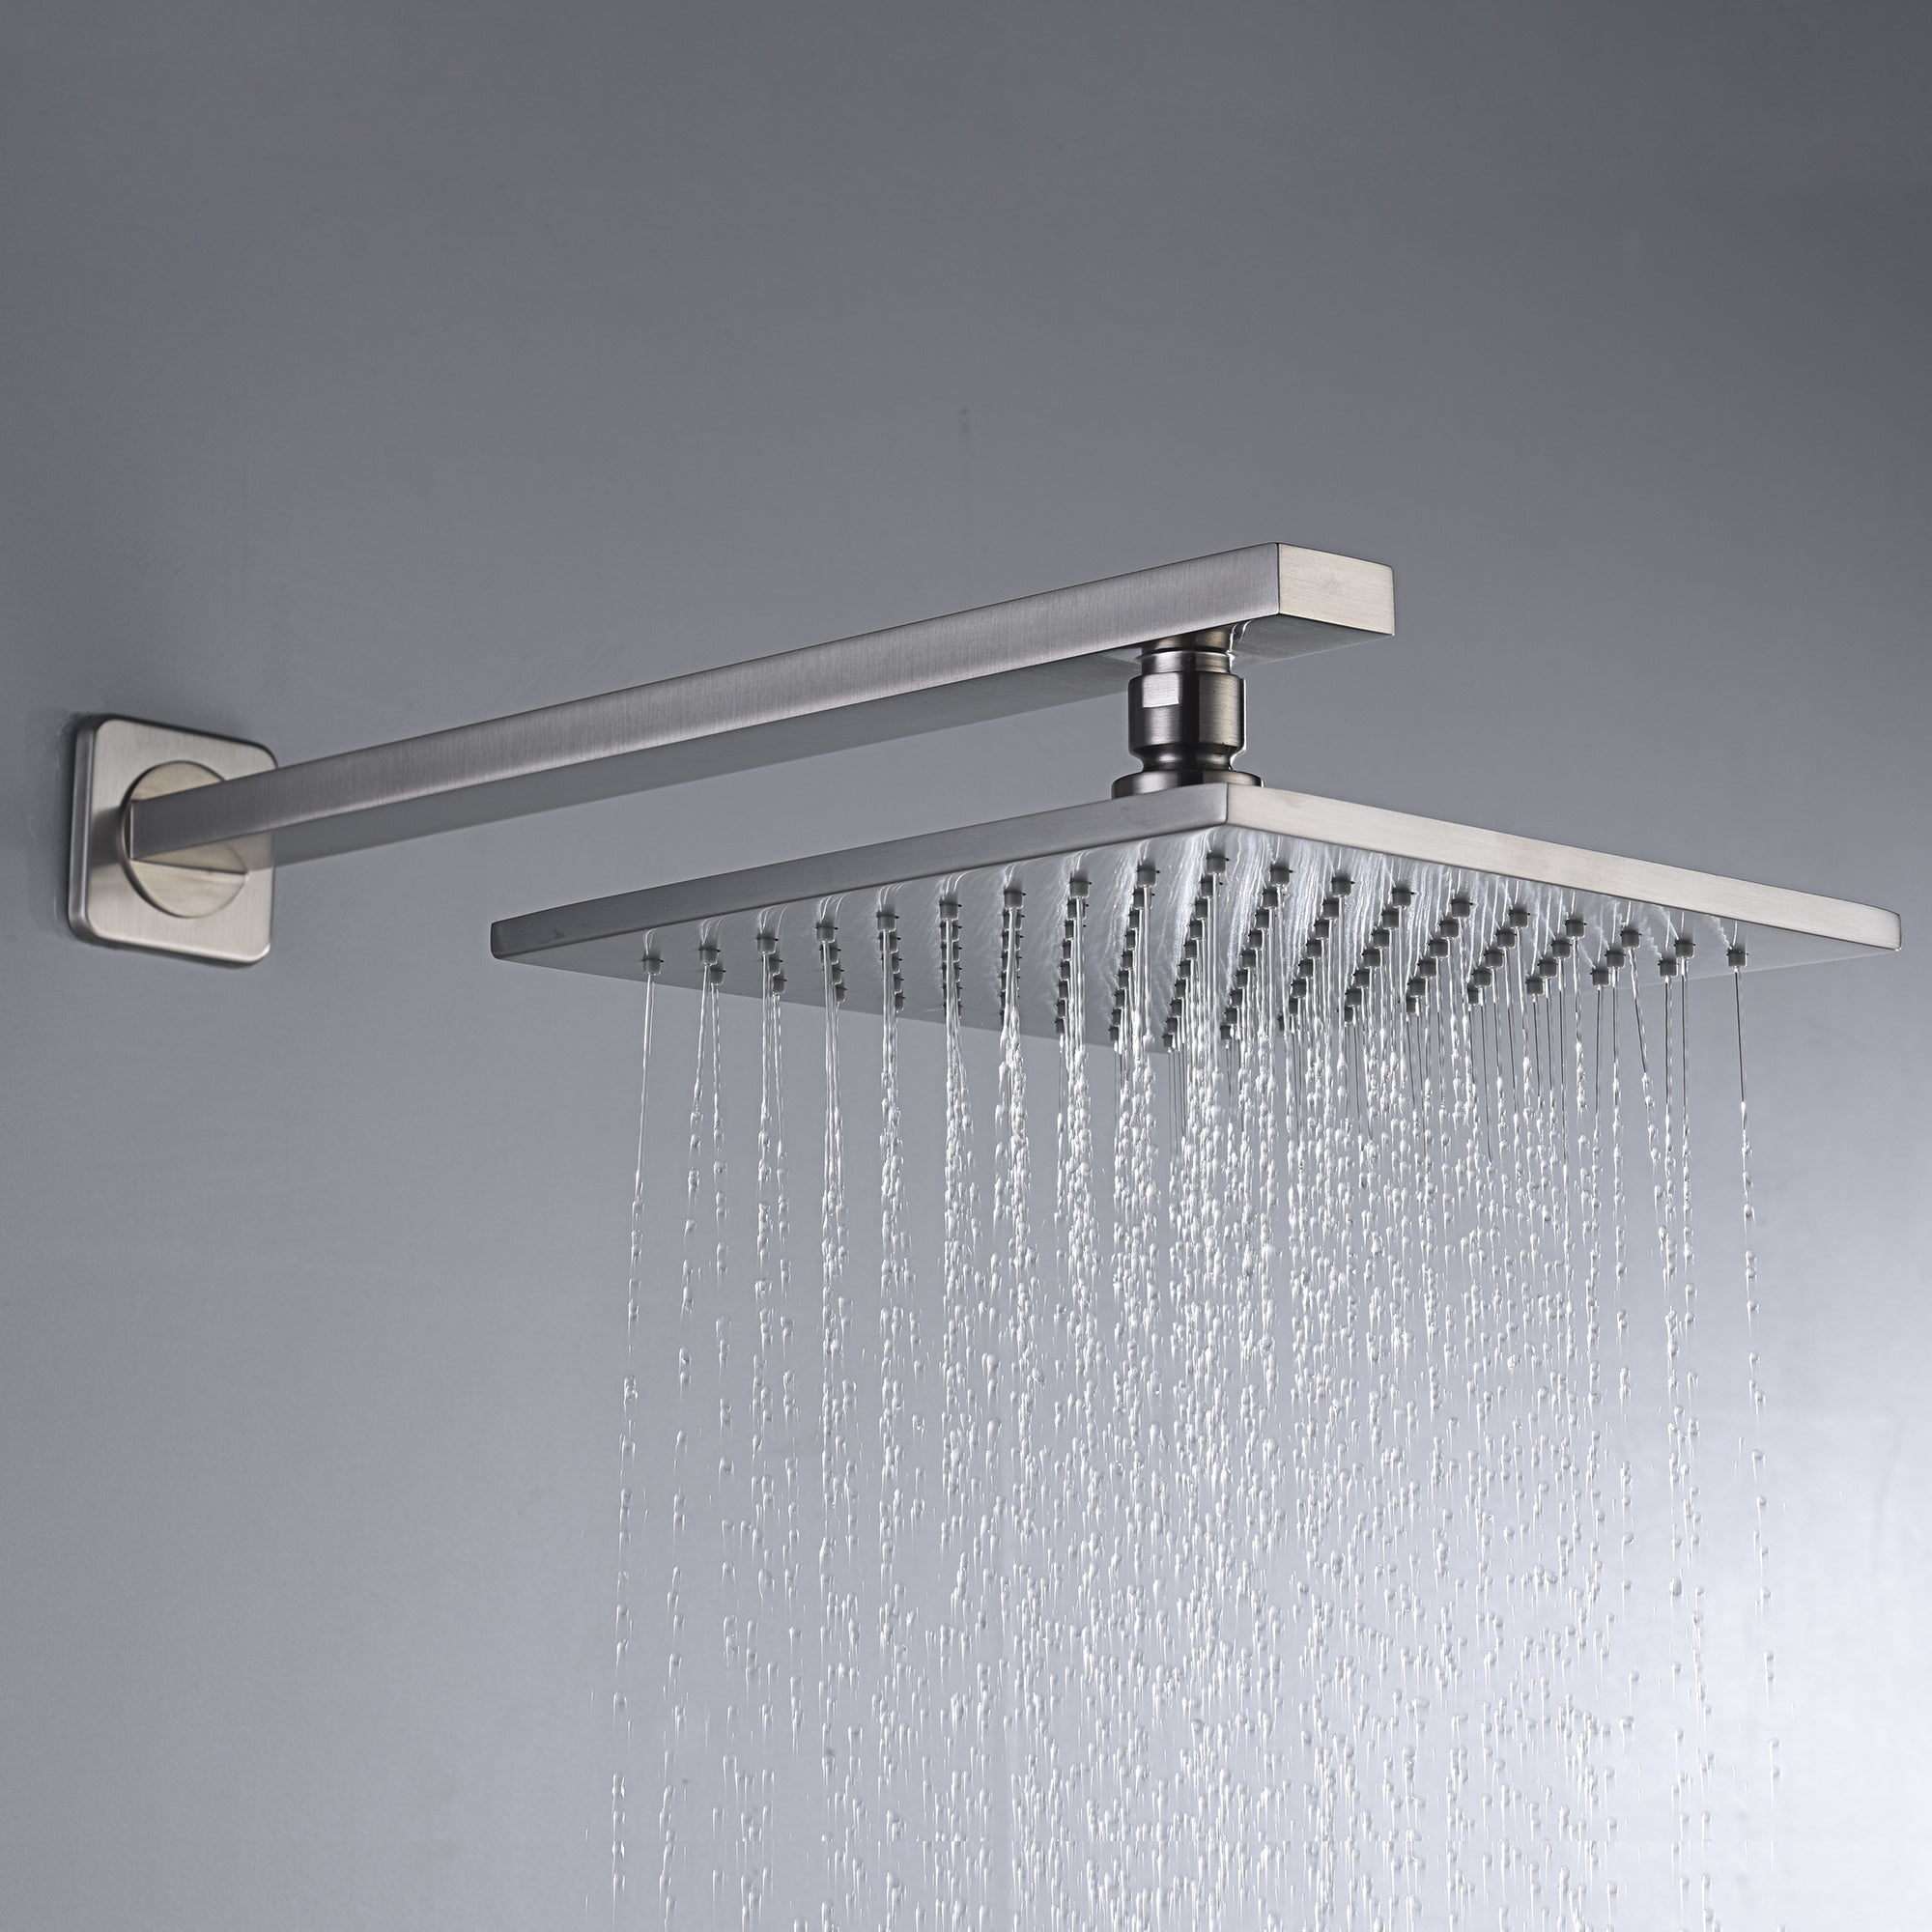 Anzzi Viace Series Wall Mounted Singular Lever Handle Control and Heavy Rain Showerhead in Brushed Nickel SH-AZ041 - Vital Hydrotherapy